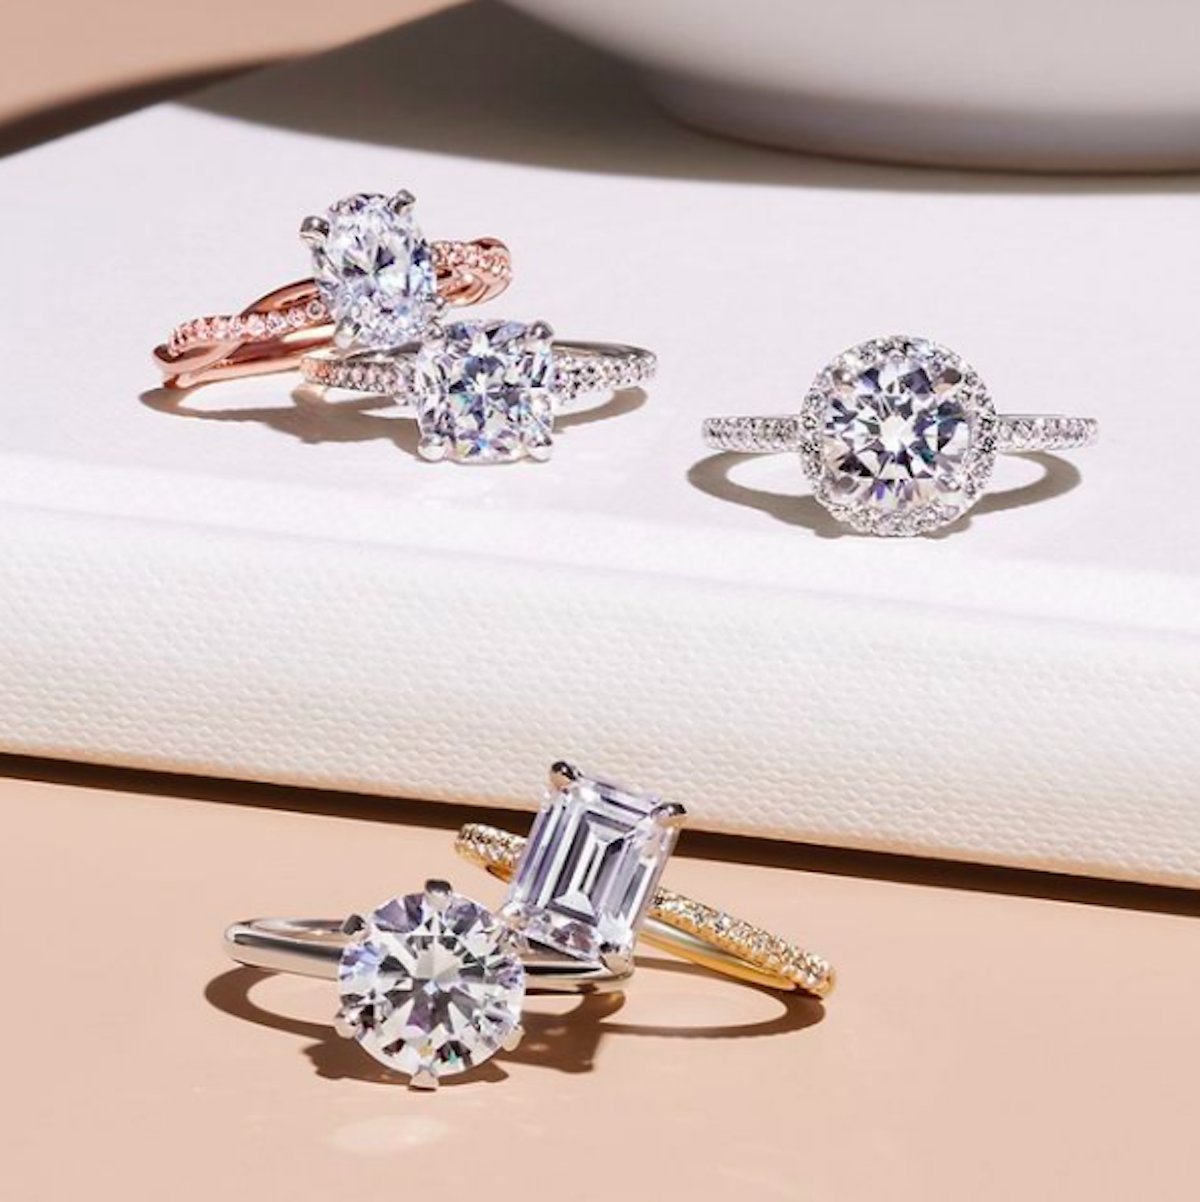 LA's 15 Best Jewelry Stores for Stunning Engagement Rings